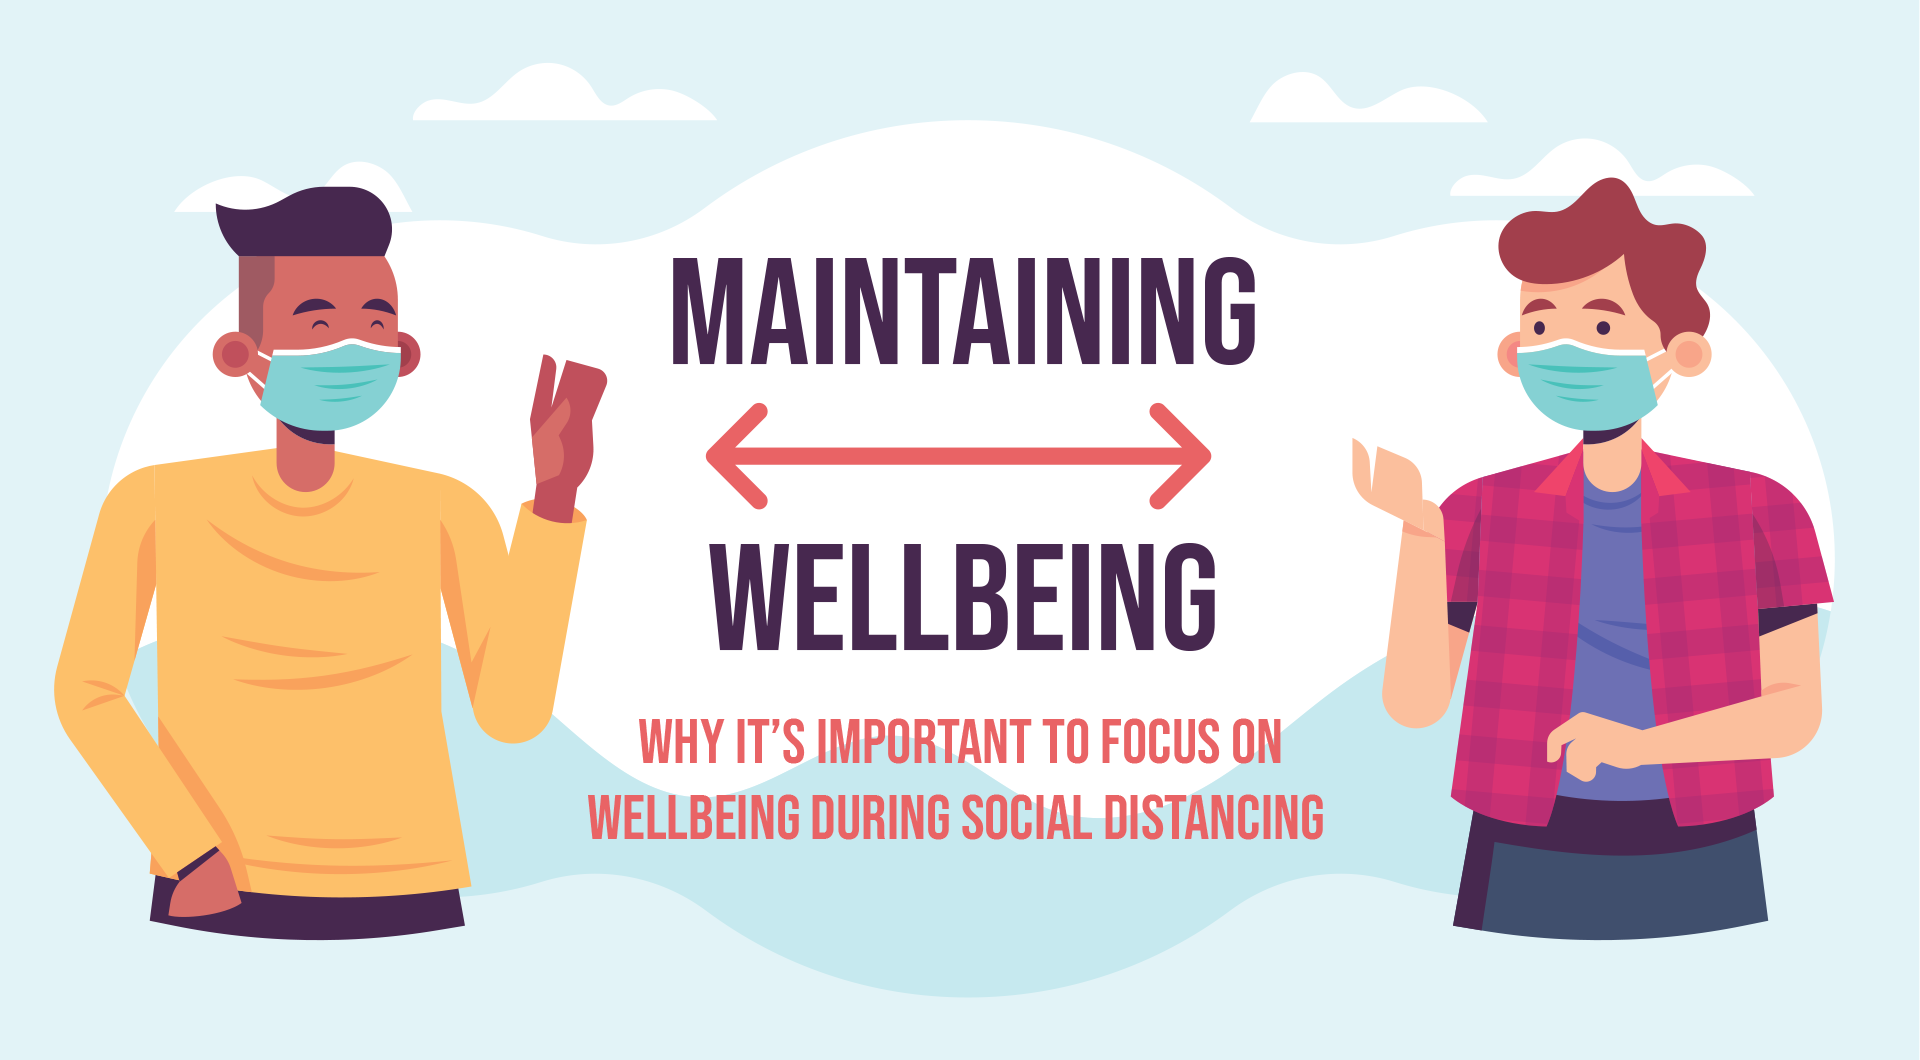 Maintaining Wellbeing: Why It's Important to Focus on Wellbeing During Social Distancing